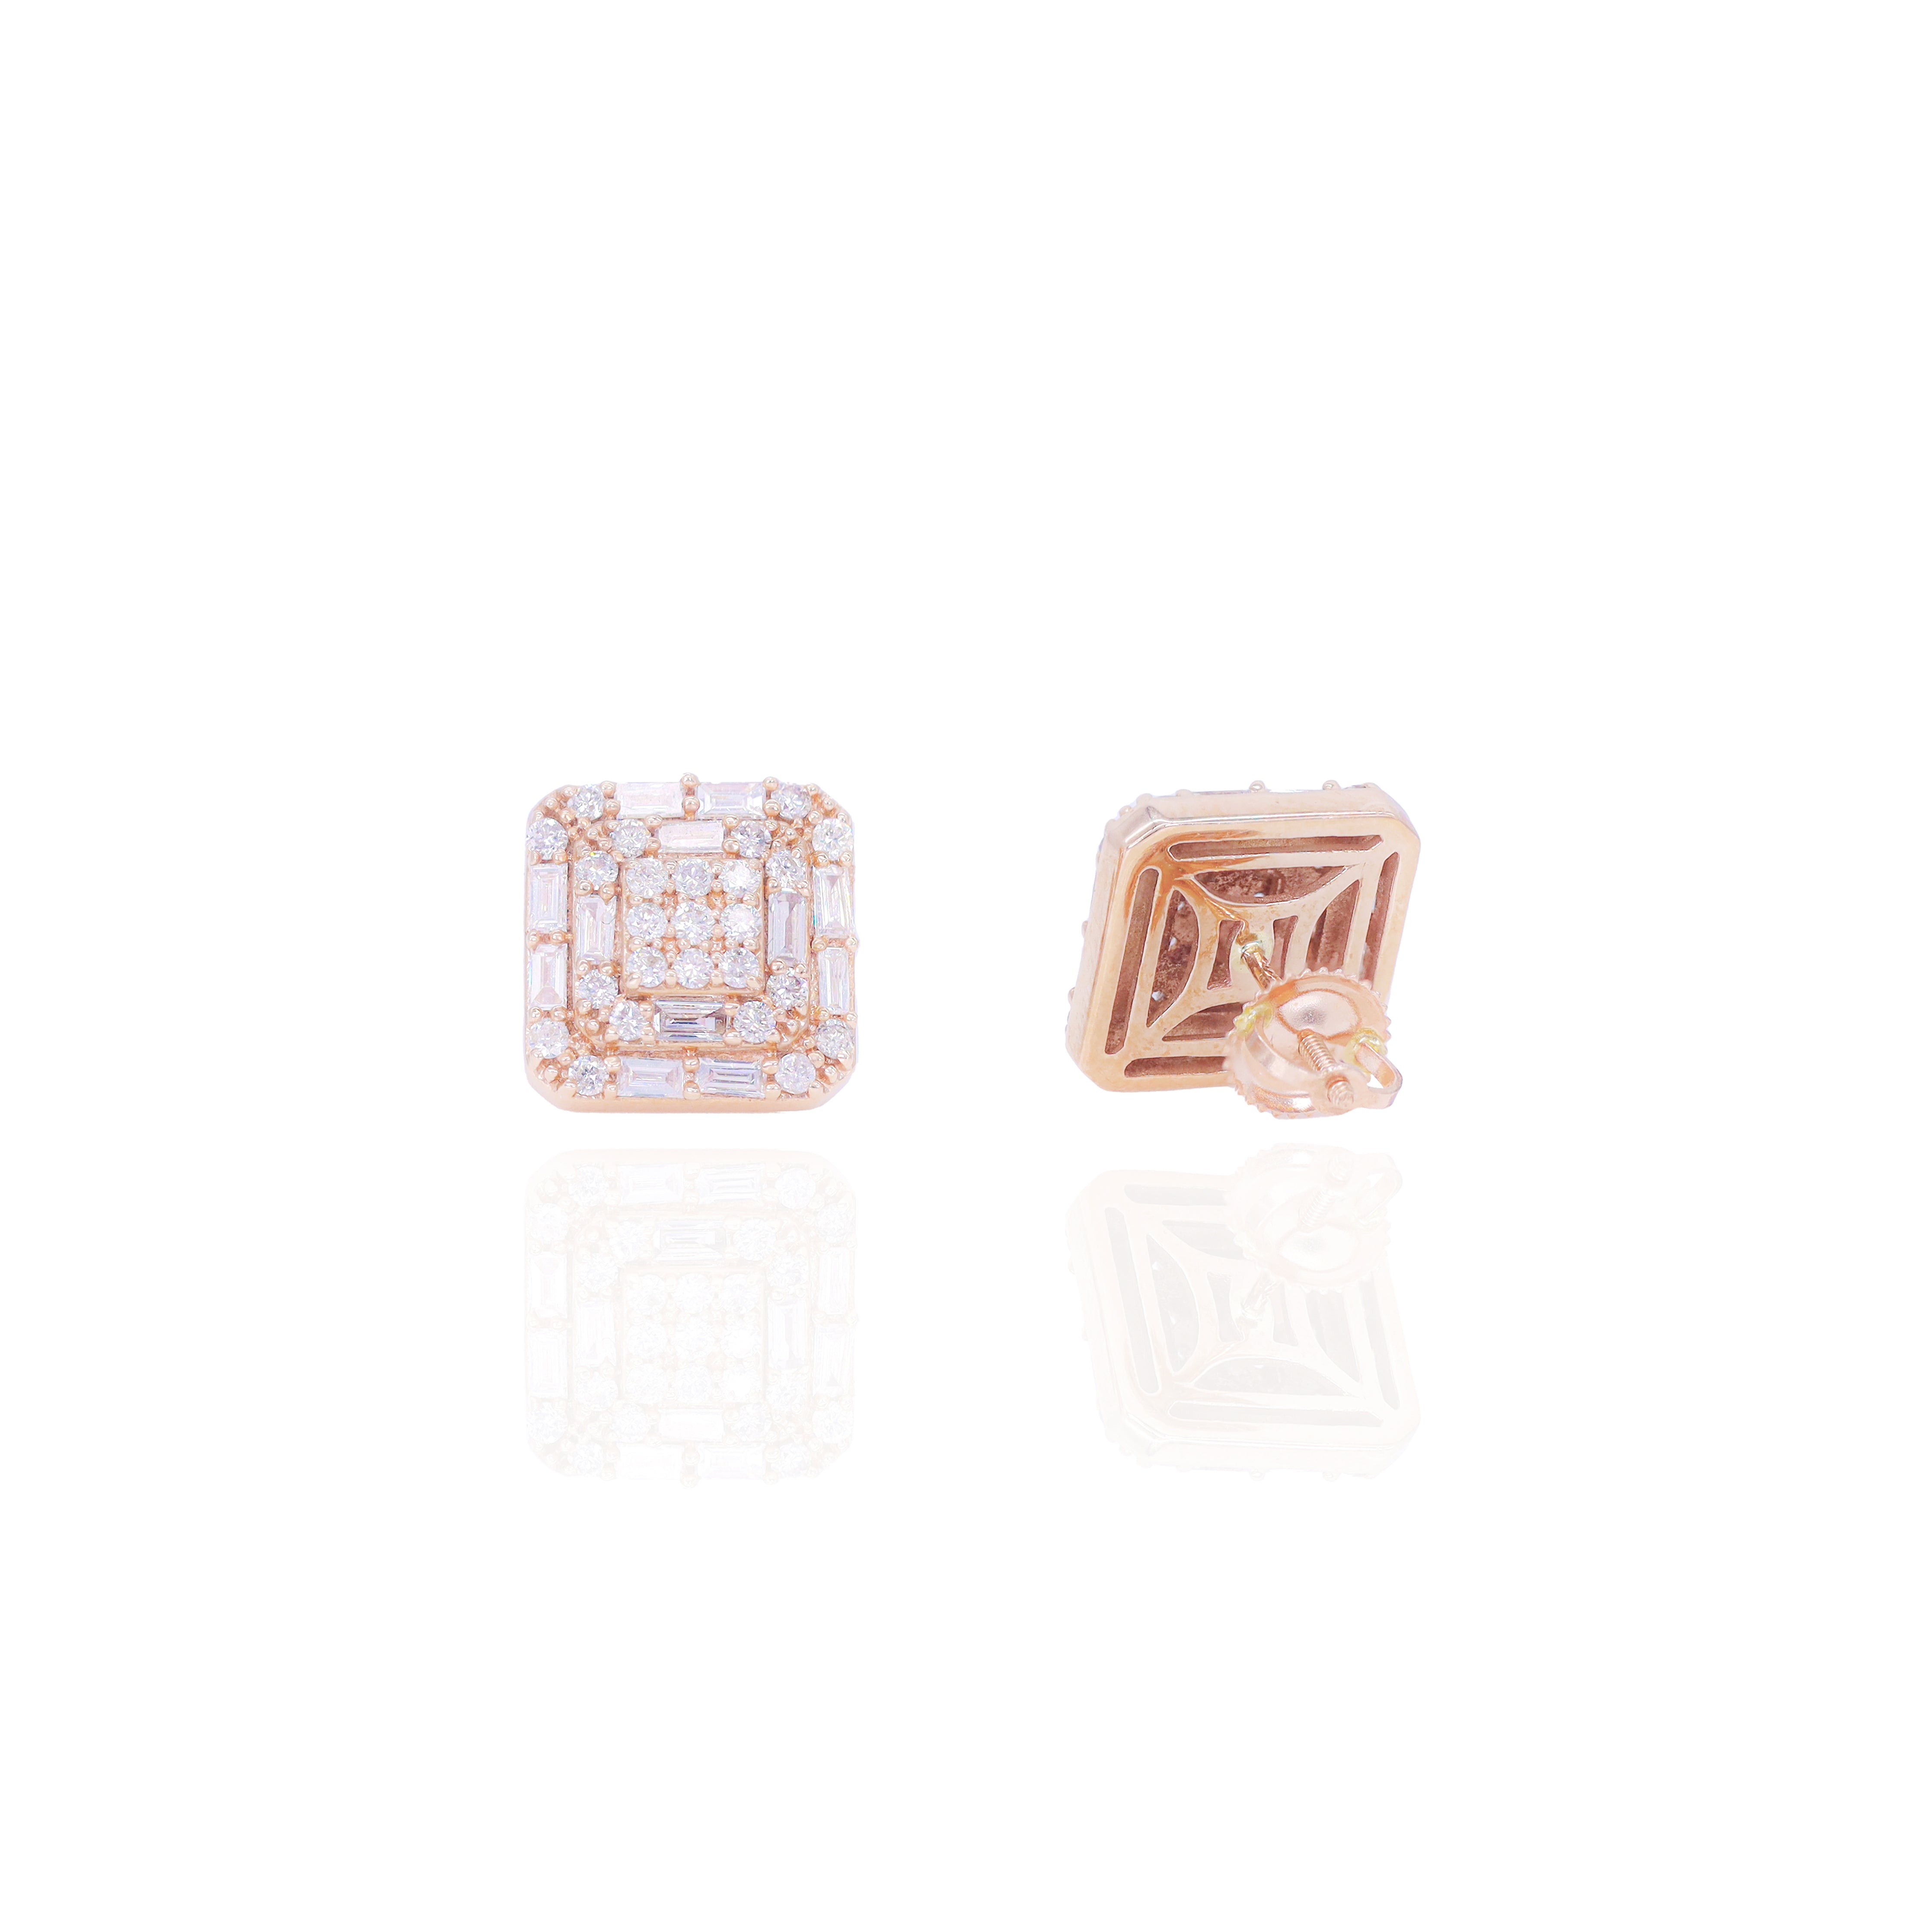 Square Shaped Round & Baguette Diamond Earrings